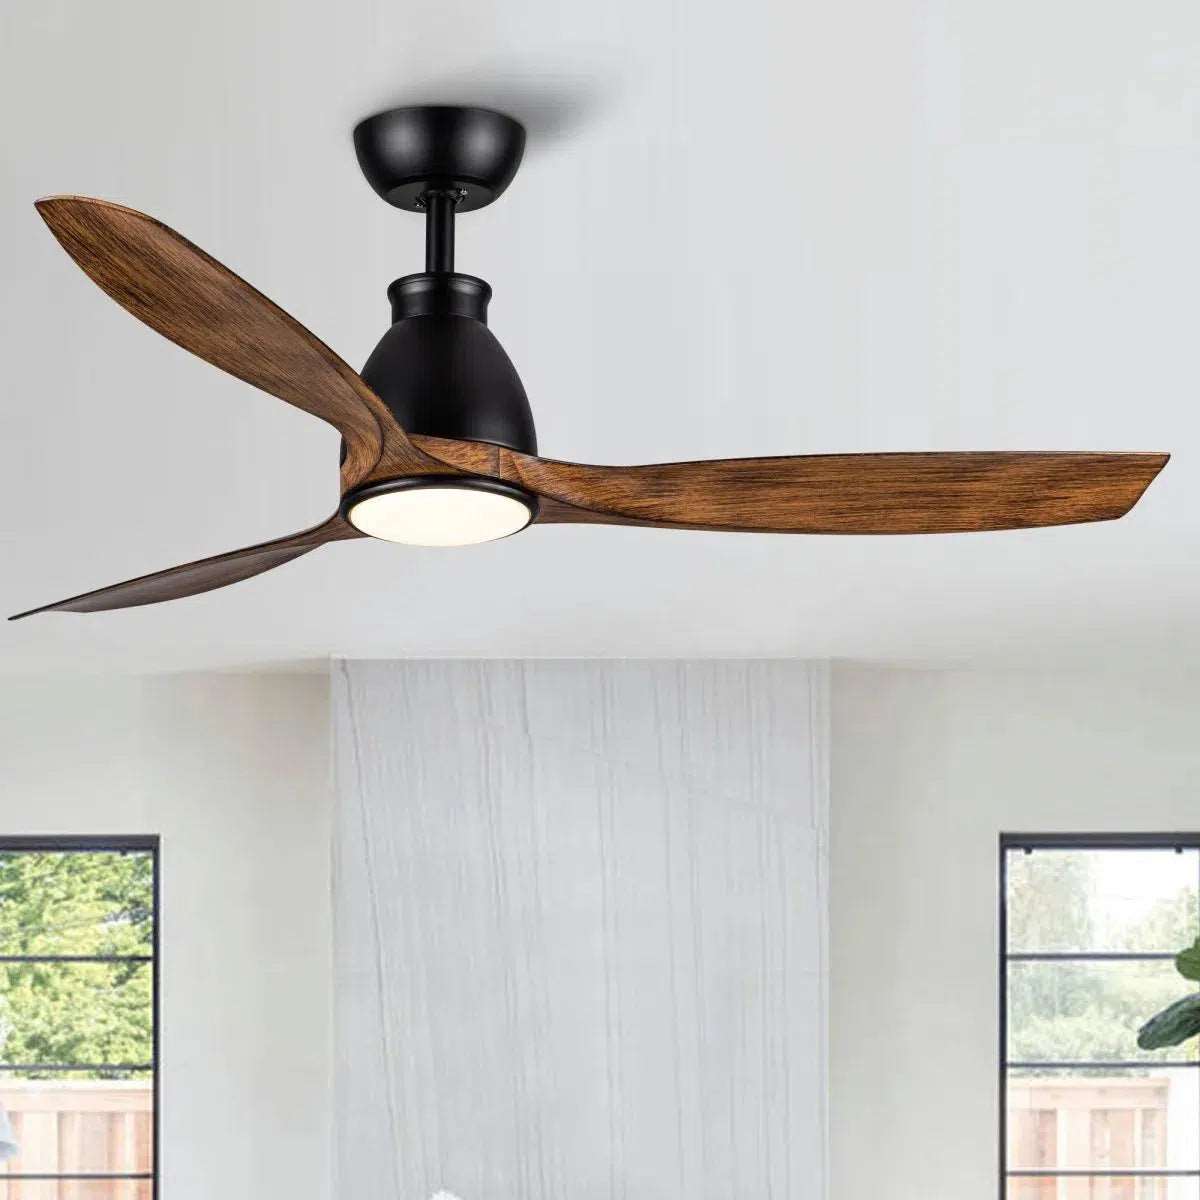 52 In.Intergrated LED Ceiling Fan with Wood Grain Blade Home Decor by Design